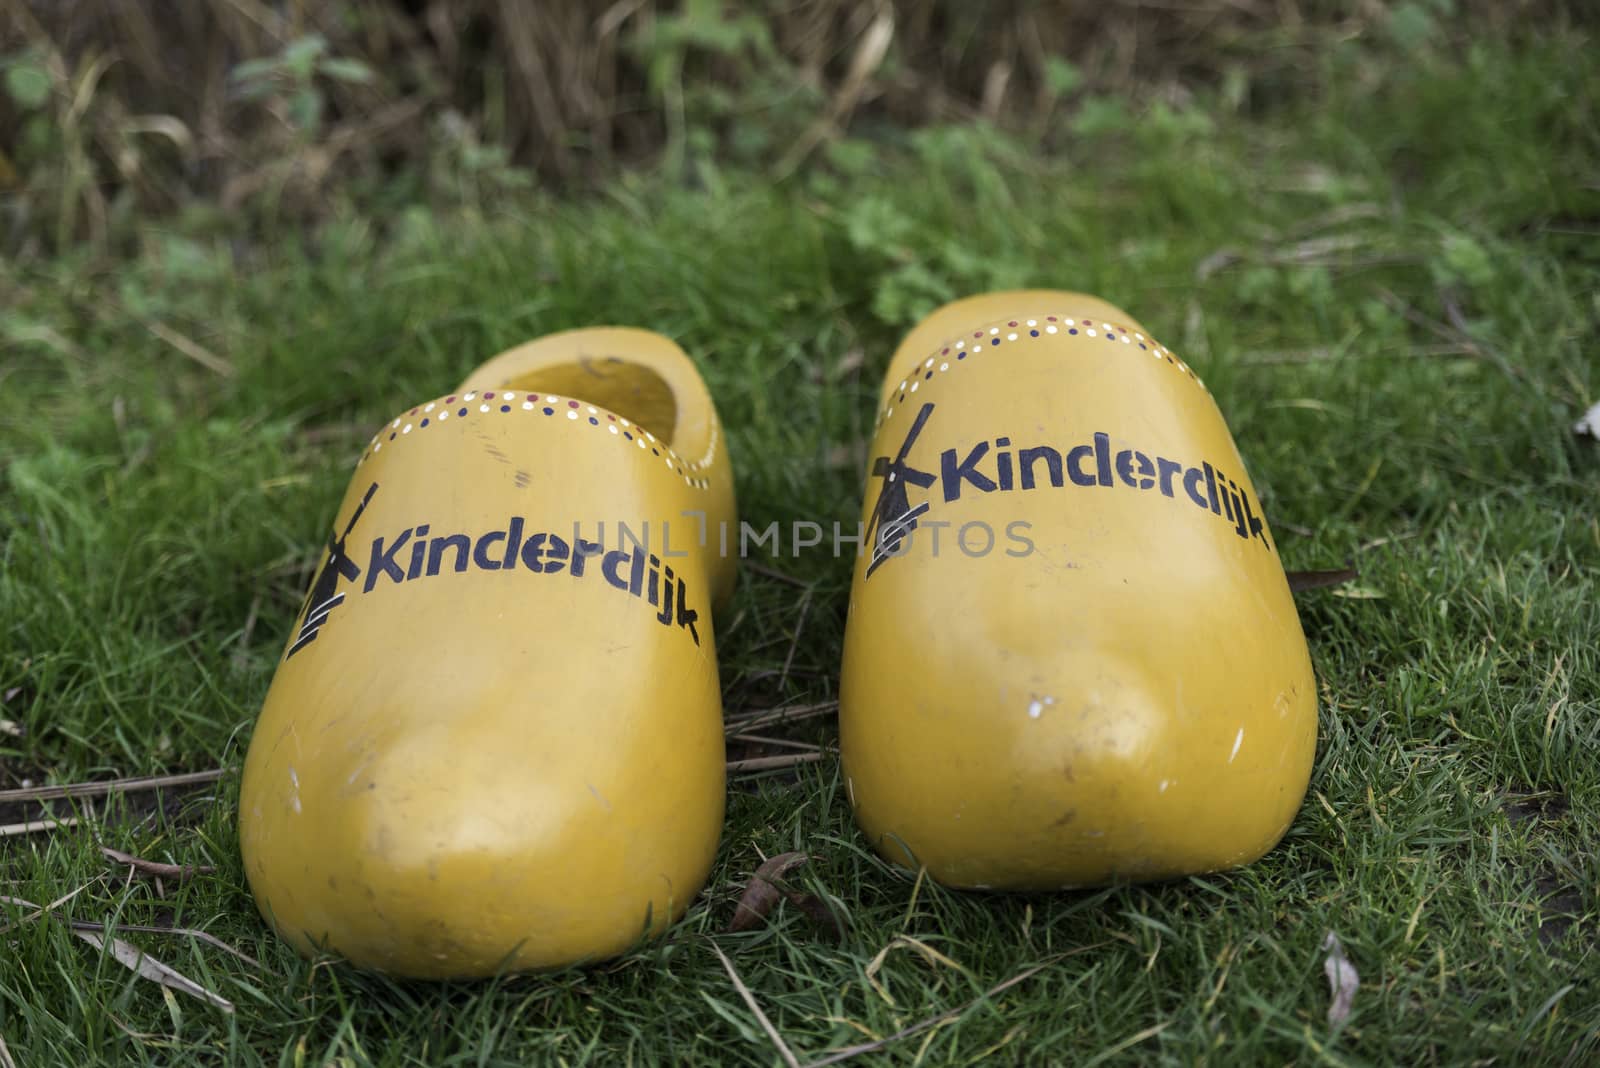 dutch wooden shoes from the Unesco area kinderdijk in Holland